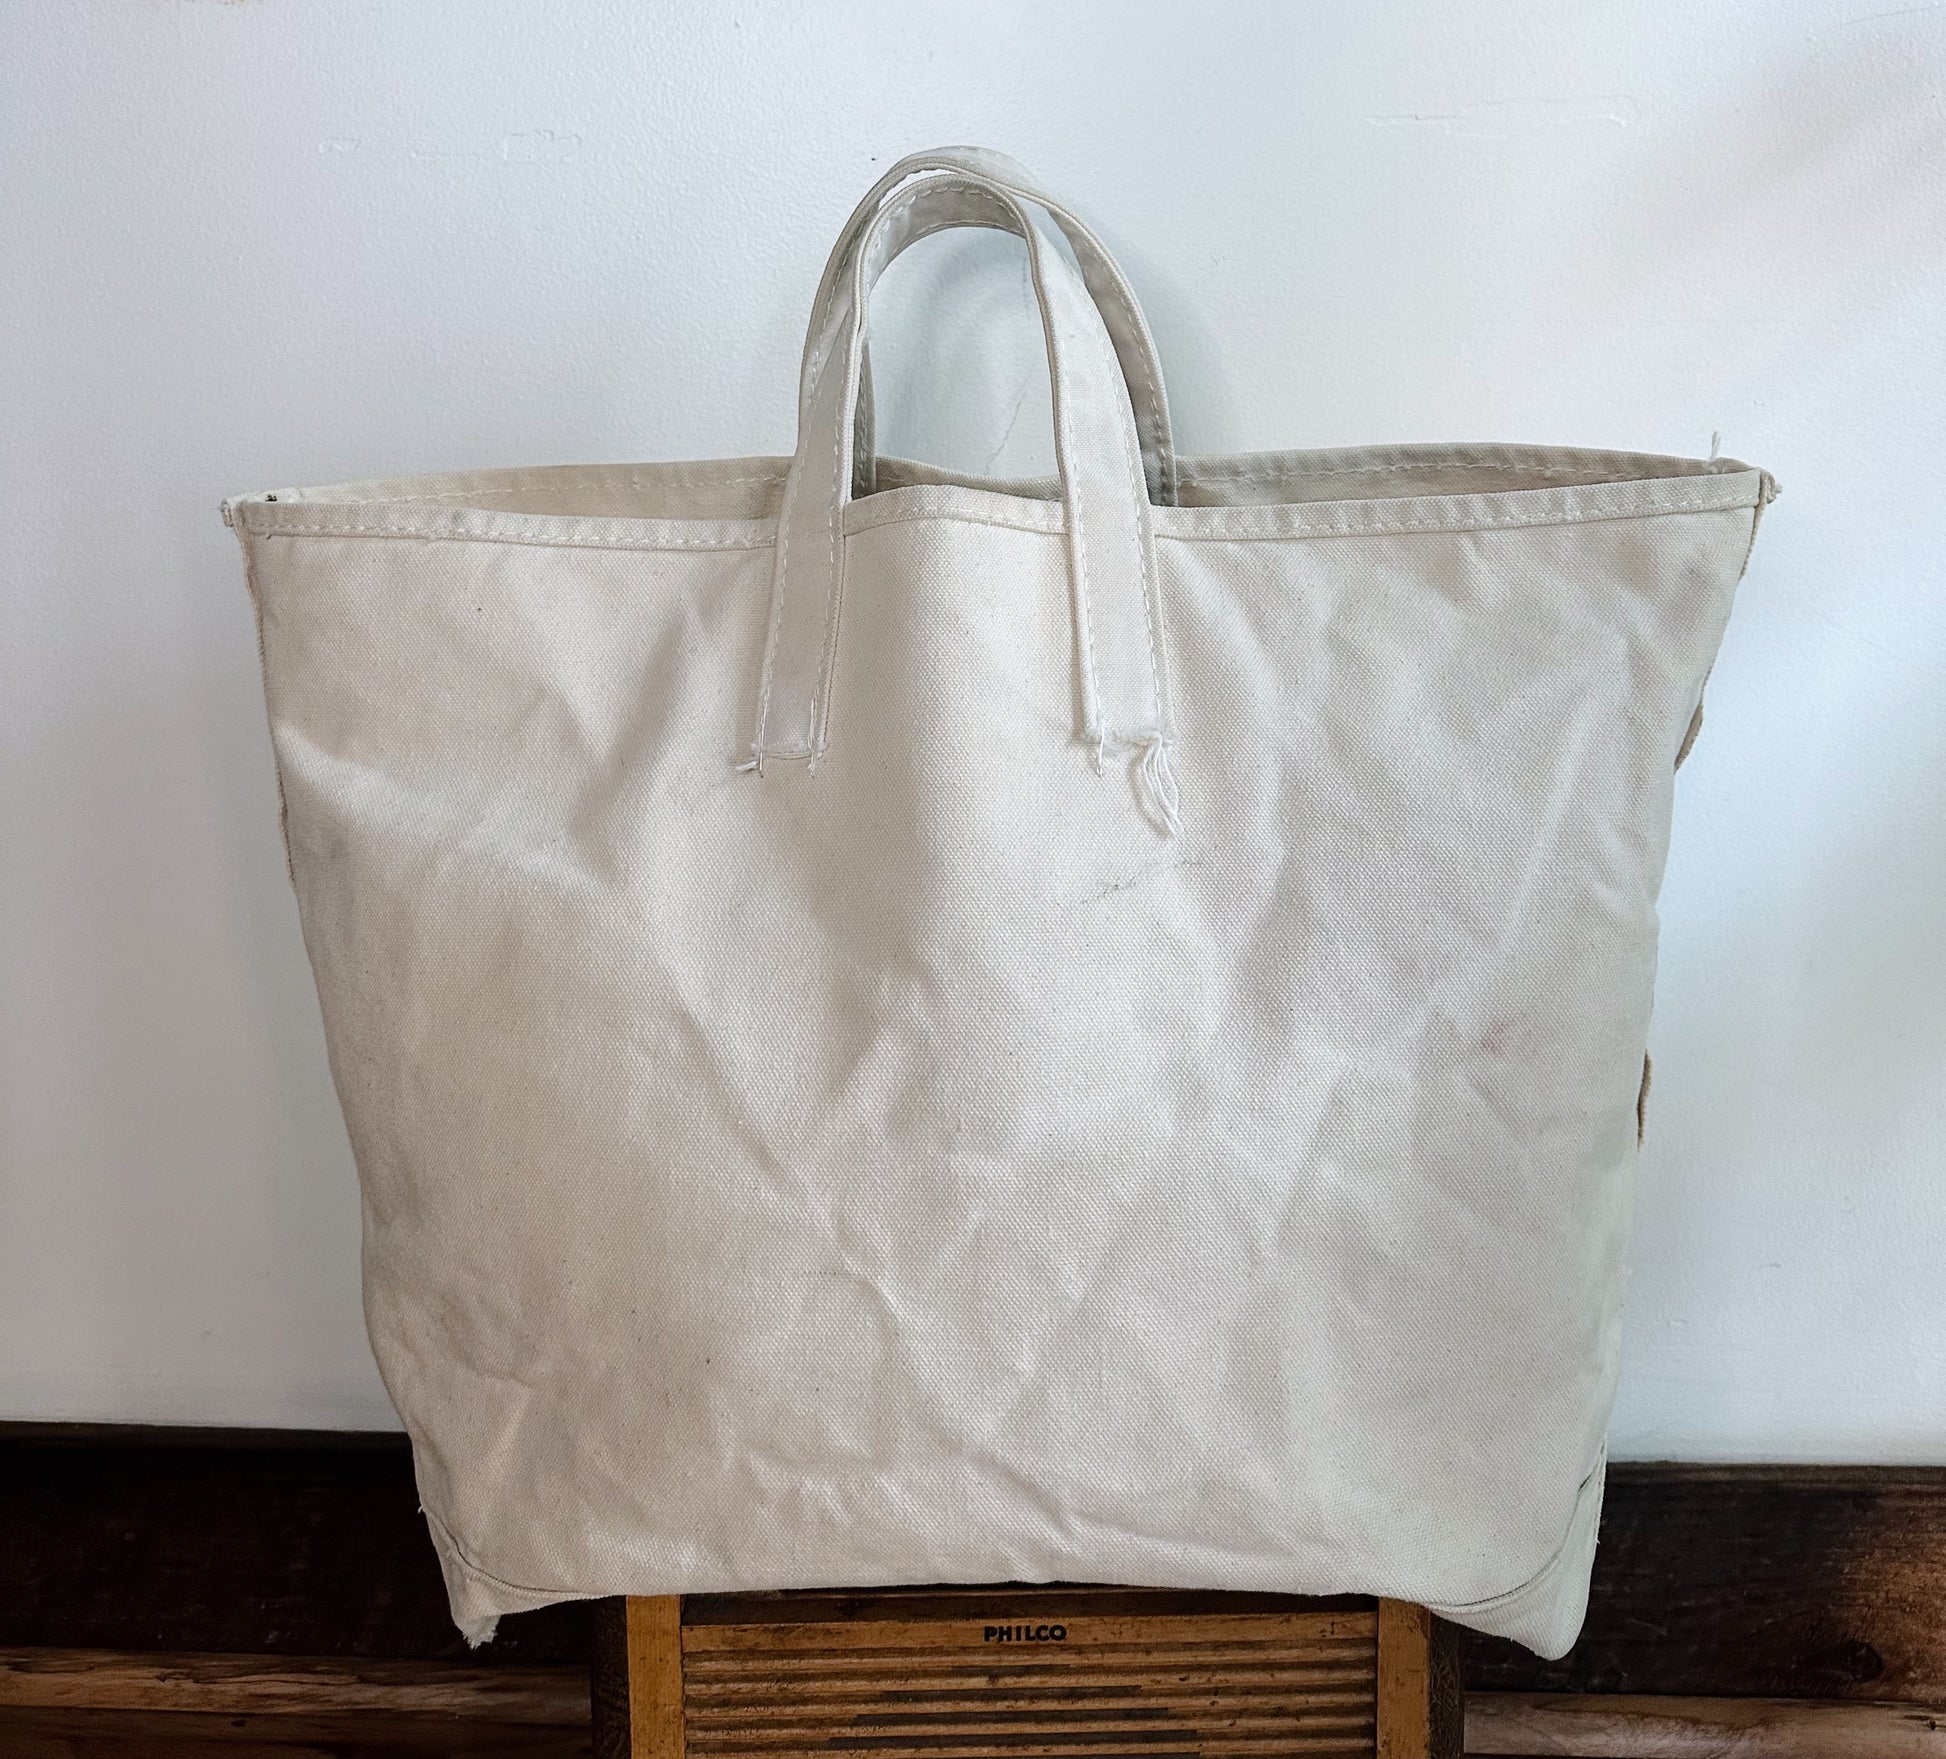 view of tote bag from other side, plain 